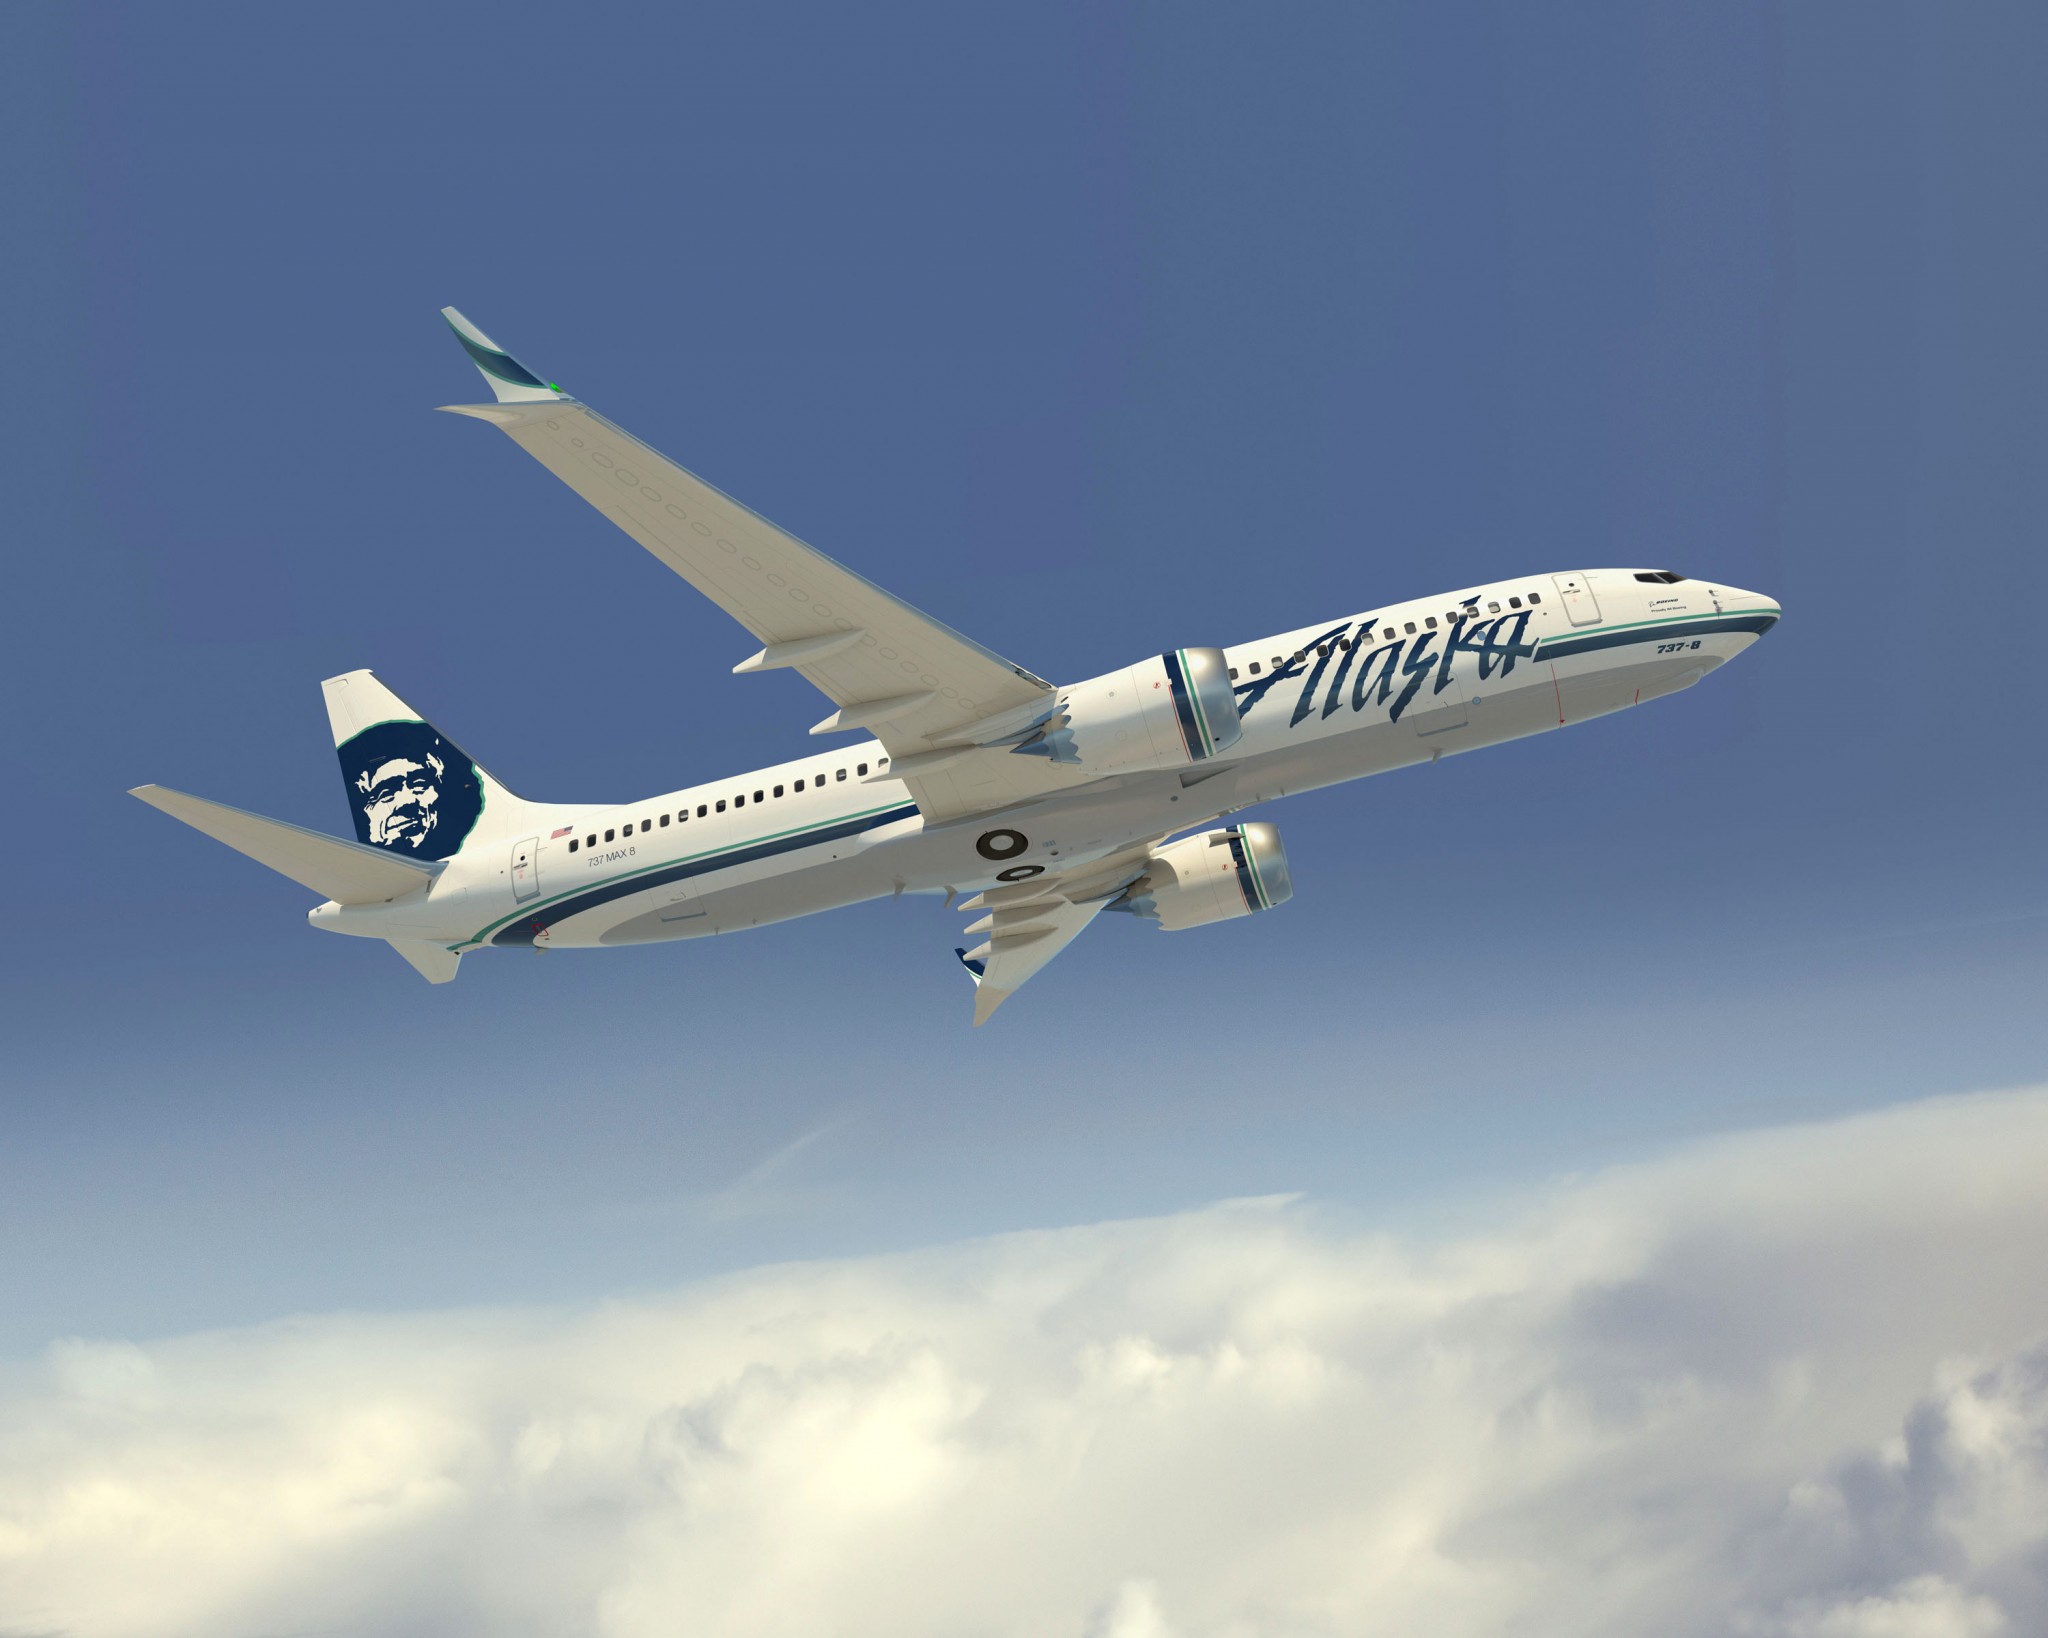 Alaska Airlines adds Condor Airlines as a mileage partner